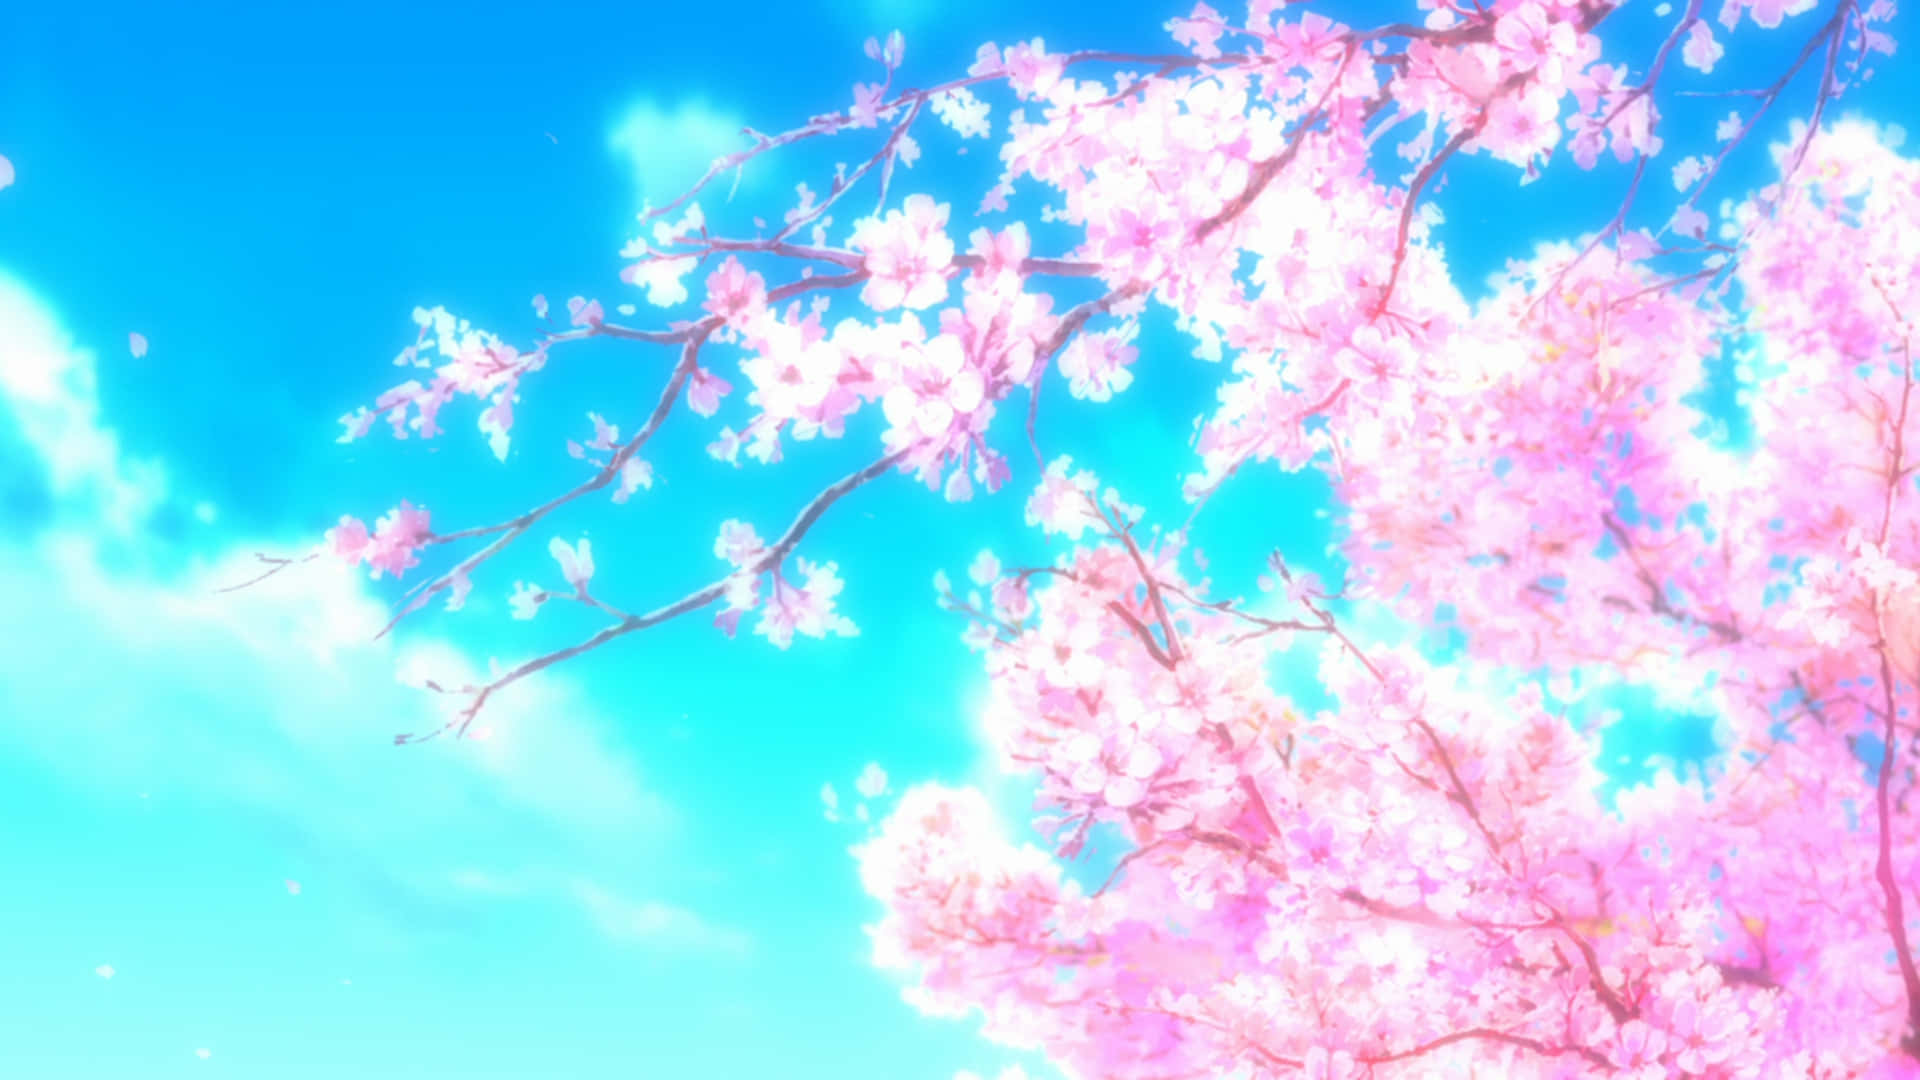 Romantic Anime Scenery with Cherry Blossoms Wallpaper